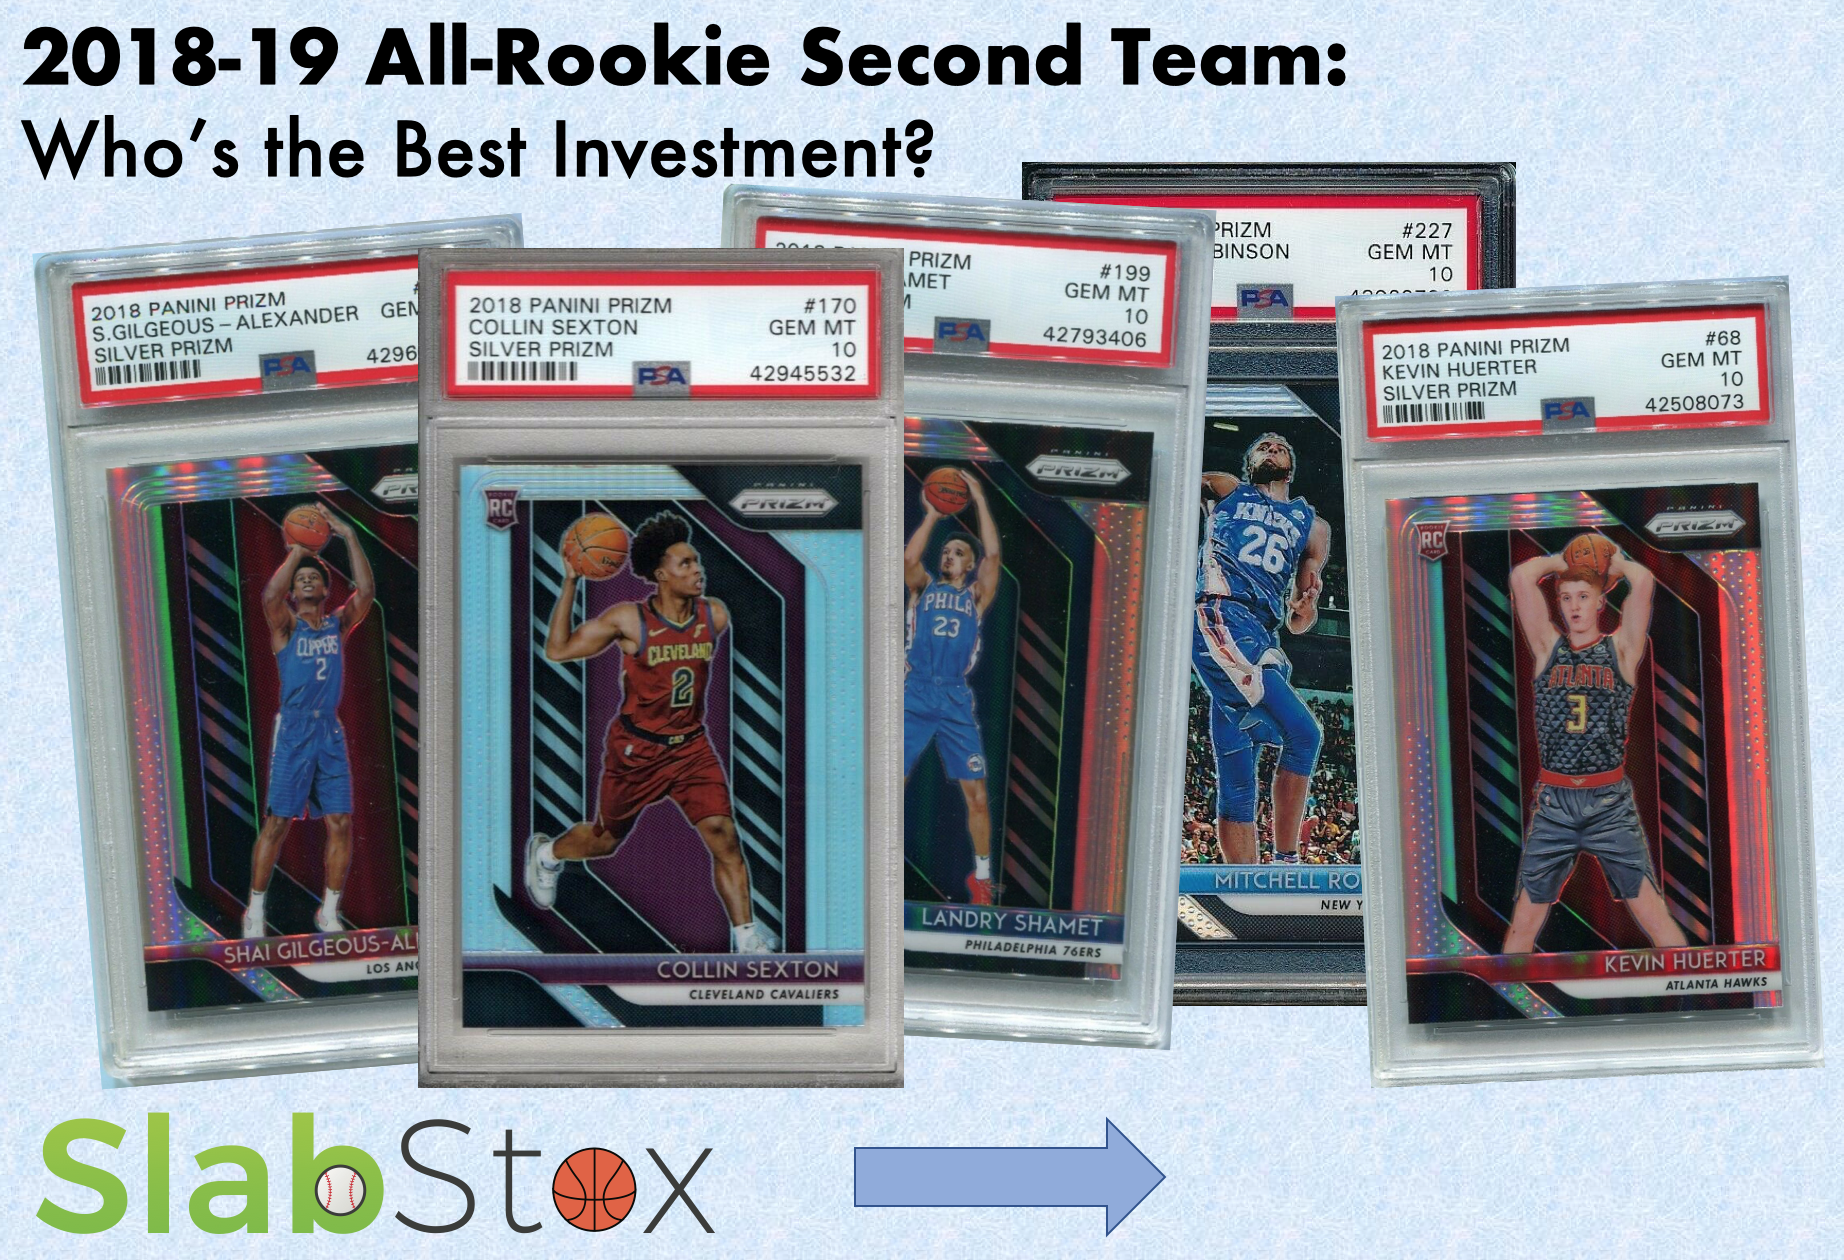 Graphic image with four sports card that says "2018-19 All-Rooke Second Team: Who's the best investment?" with the SlabStox logo underneath